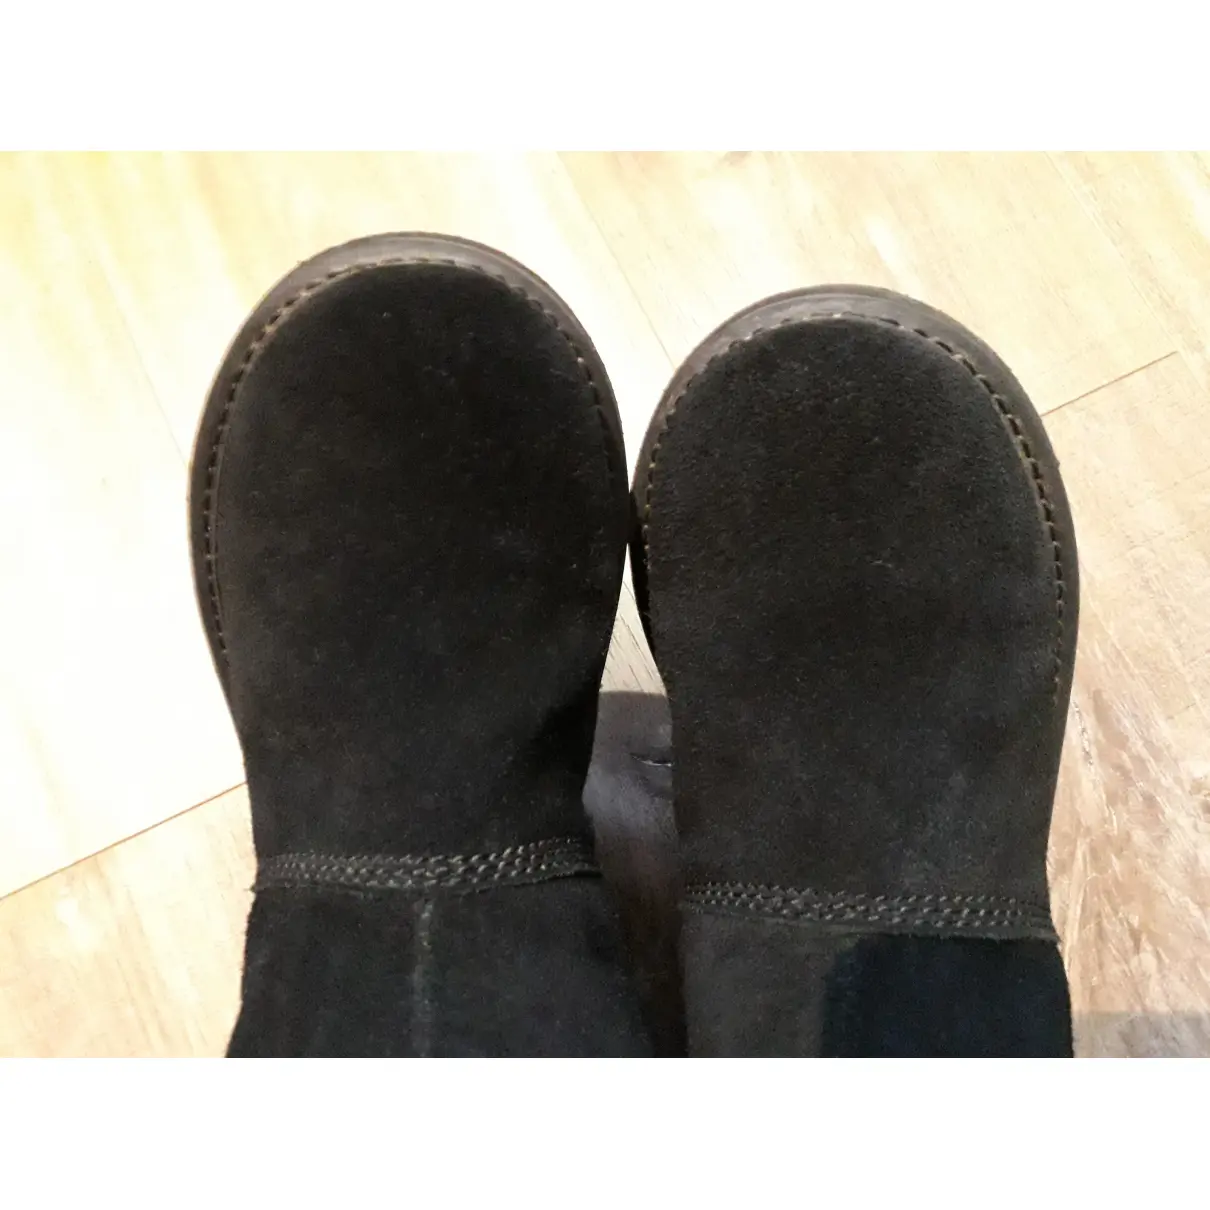 Ankle boots Sorel